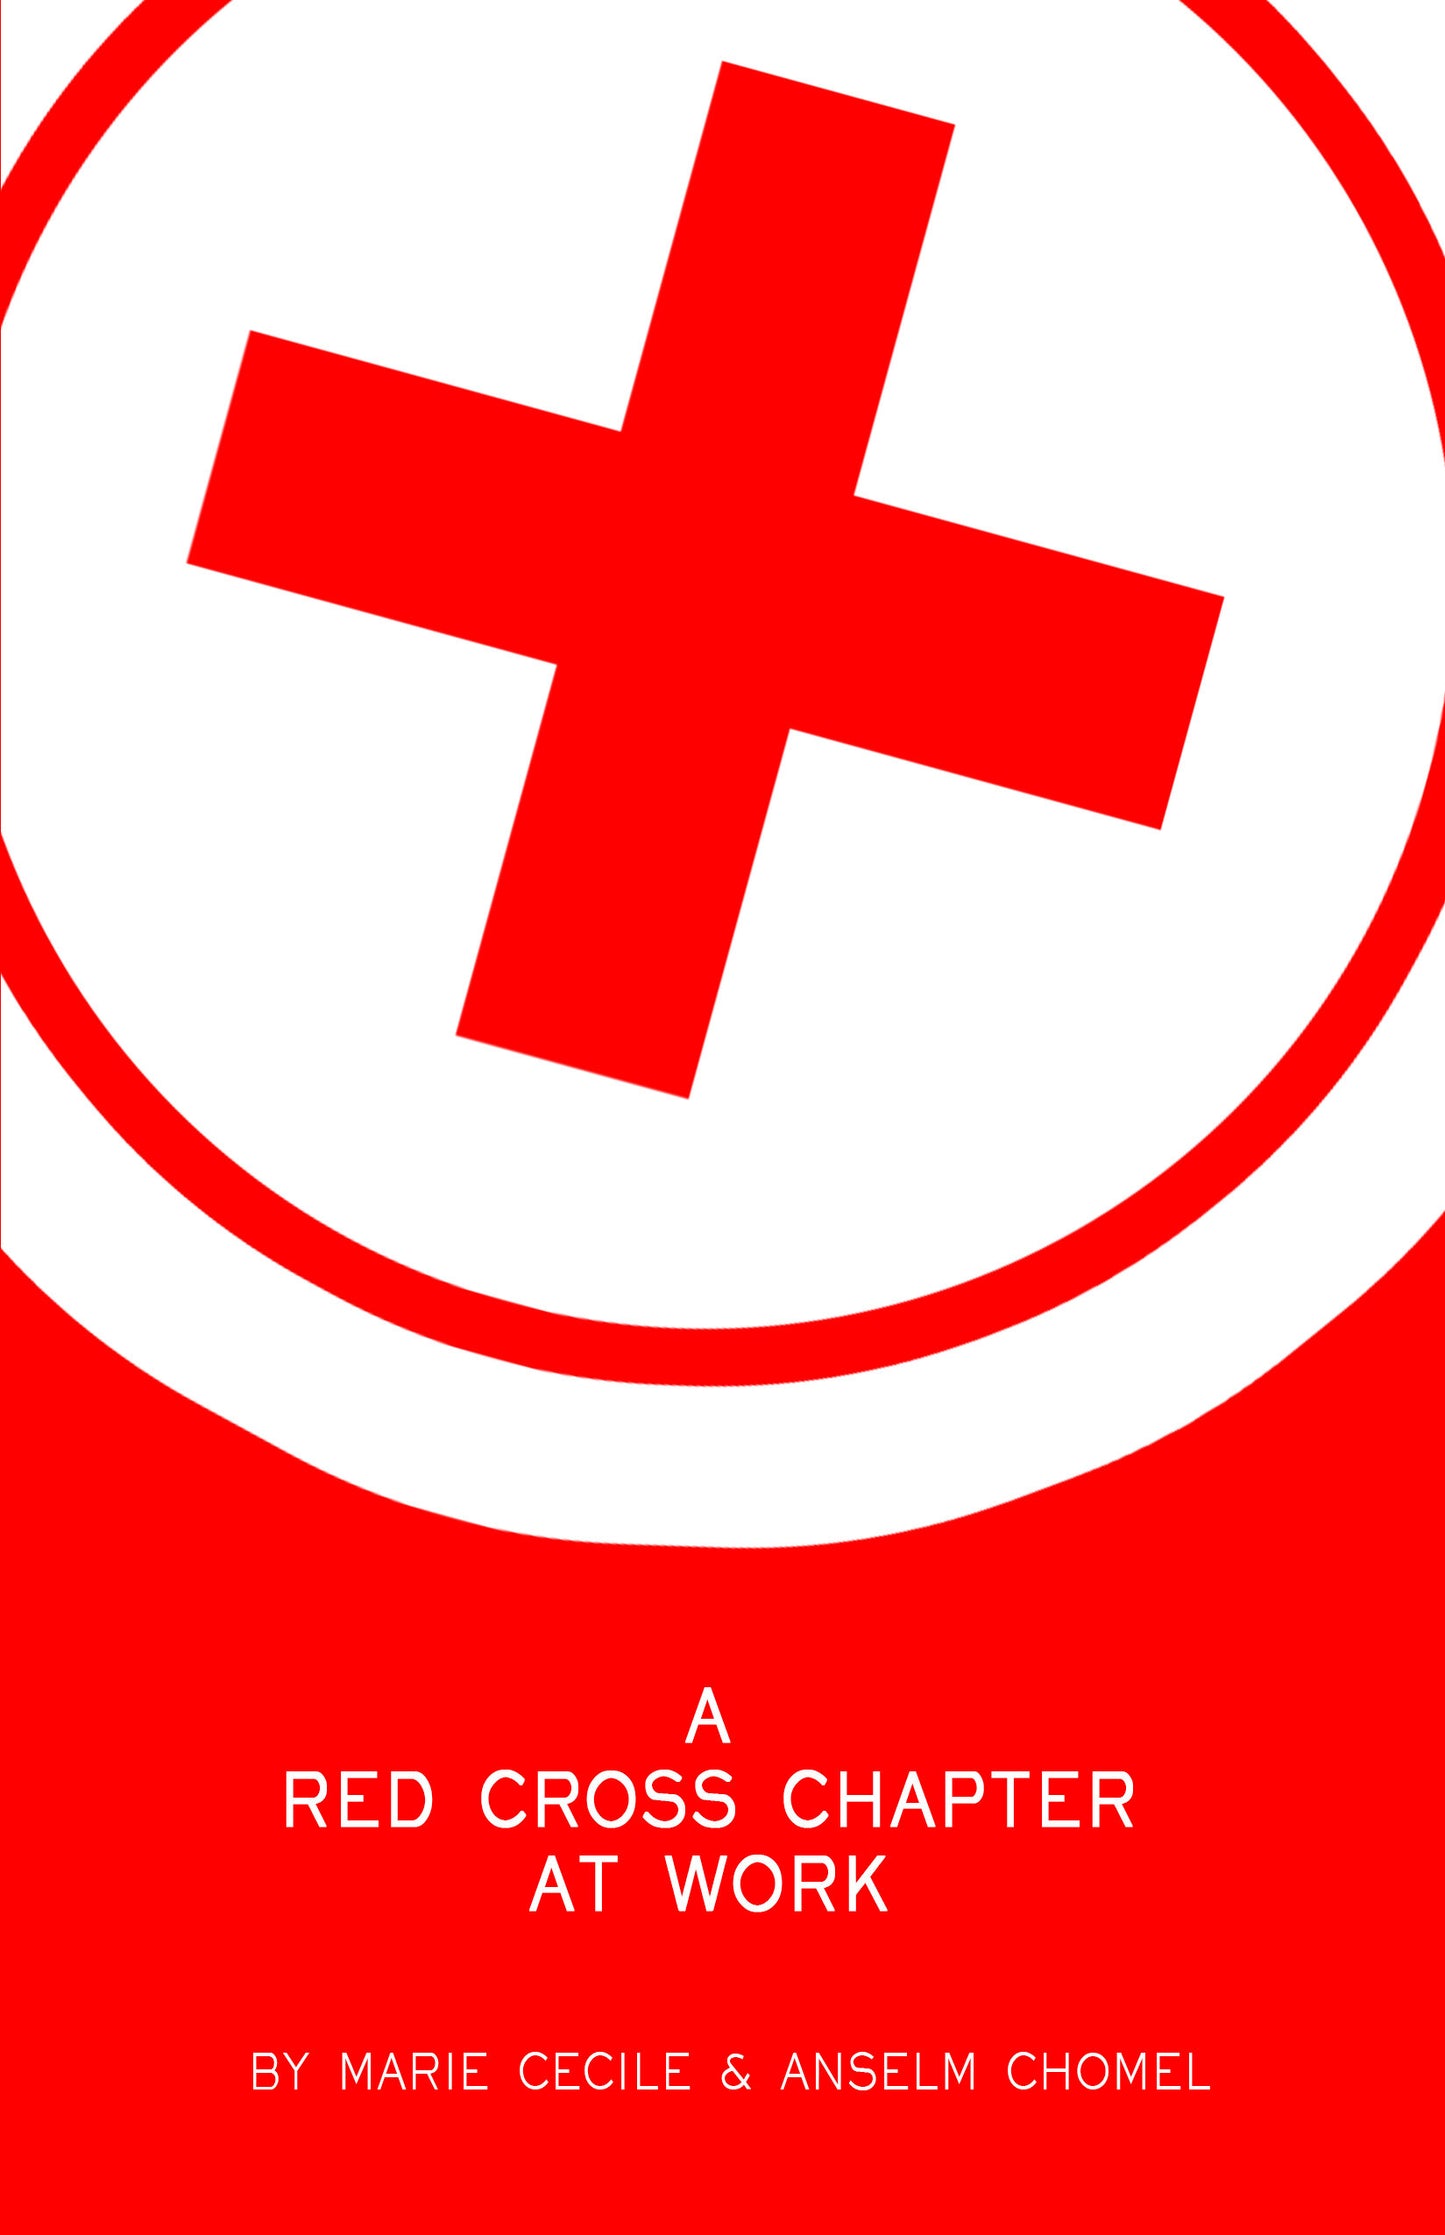 A Red Cross Chapter at Work